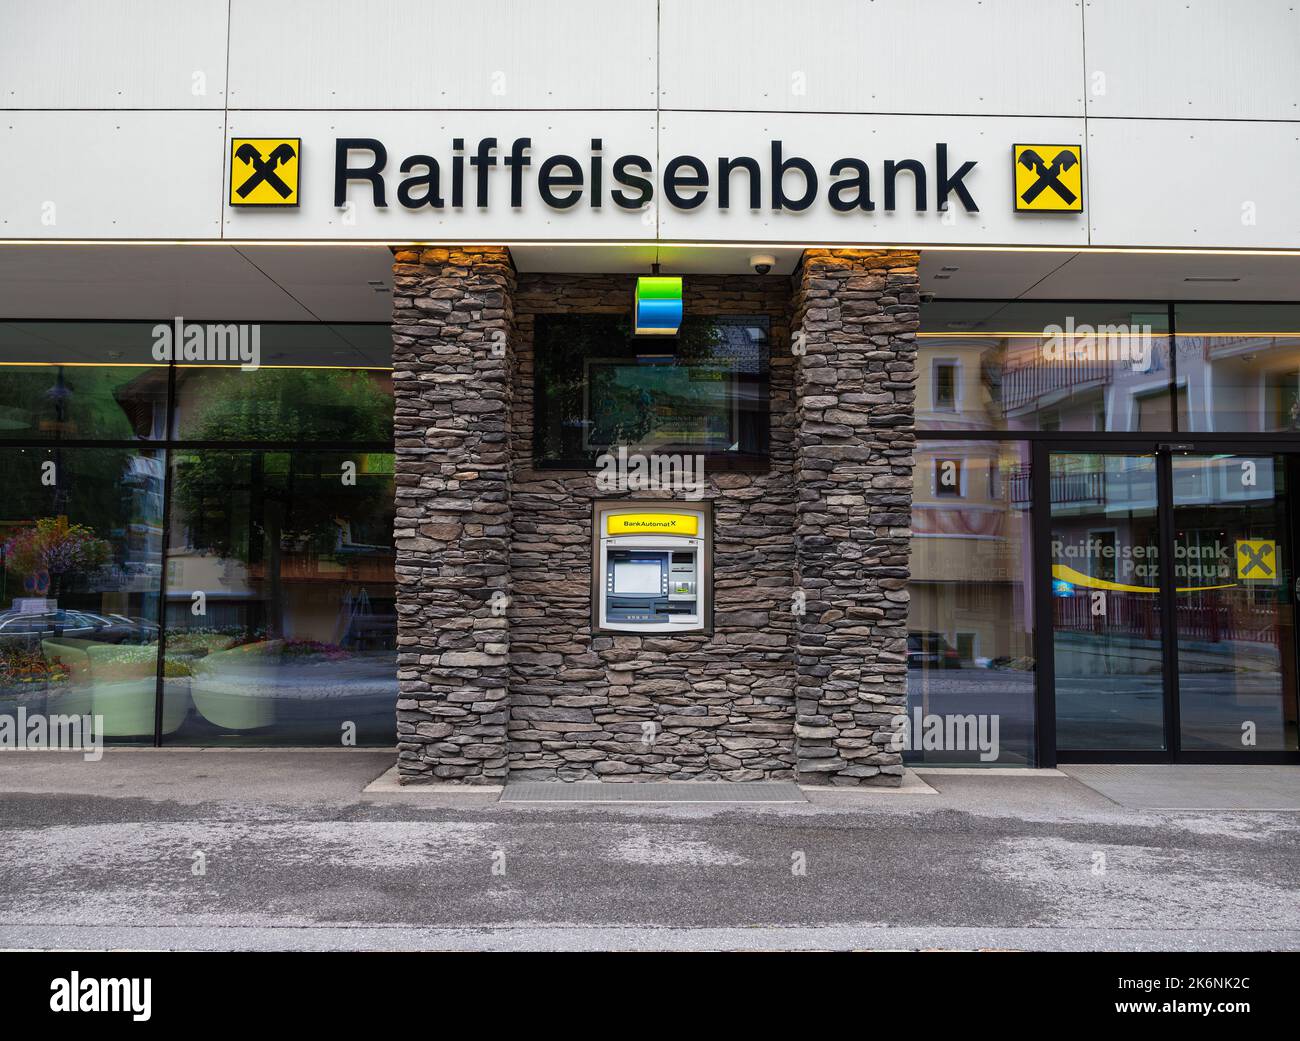 Ischgl, Austria - July 25, 2022: Raiffeisenbank refers to cooperative banks in Europe that are rooted in the early credit unions of Friedrich Wilhelm Stock Photo